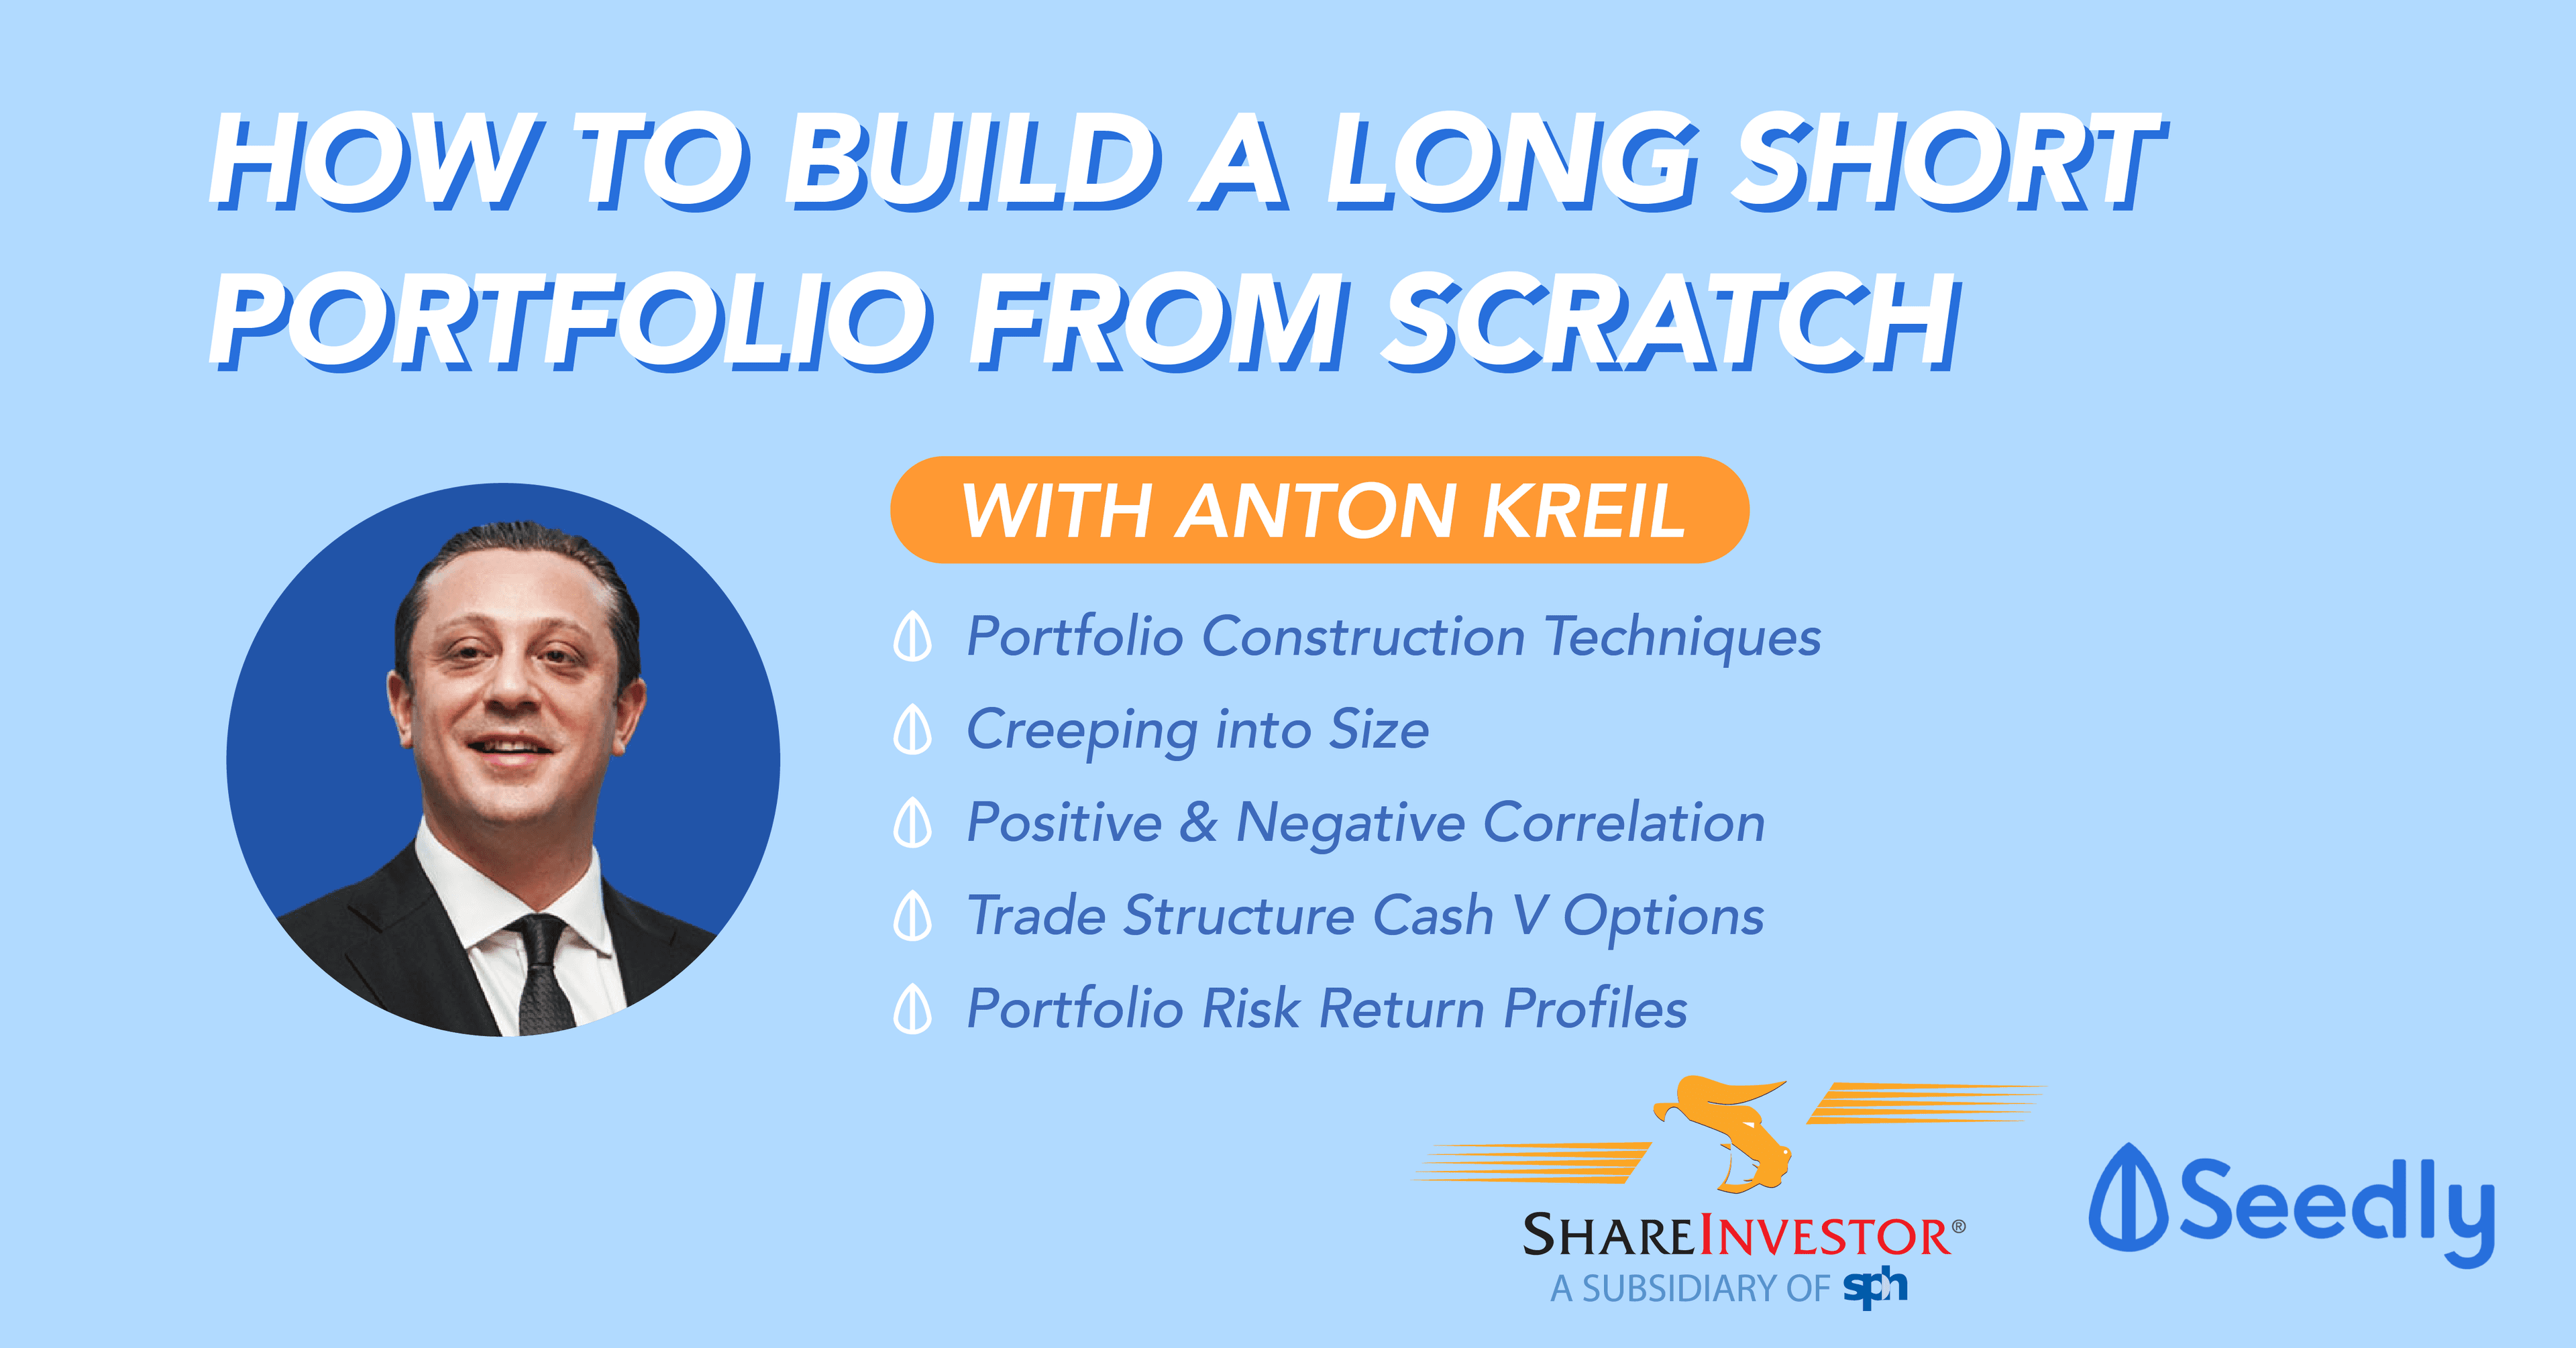 SPECIAL: How To Build The Long-Short Portfolio From Scratch?